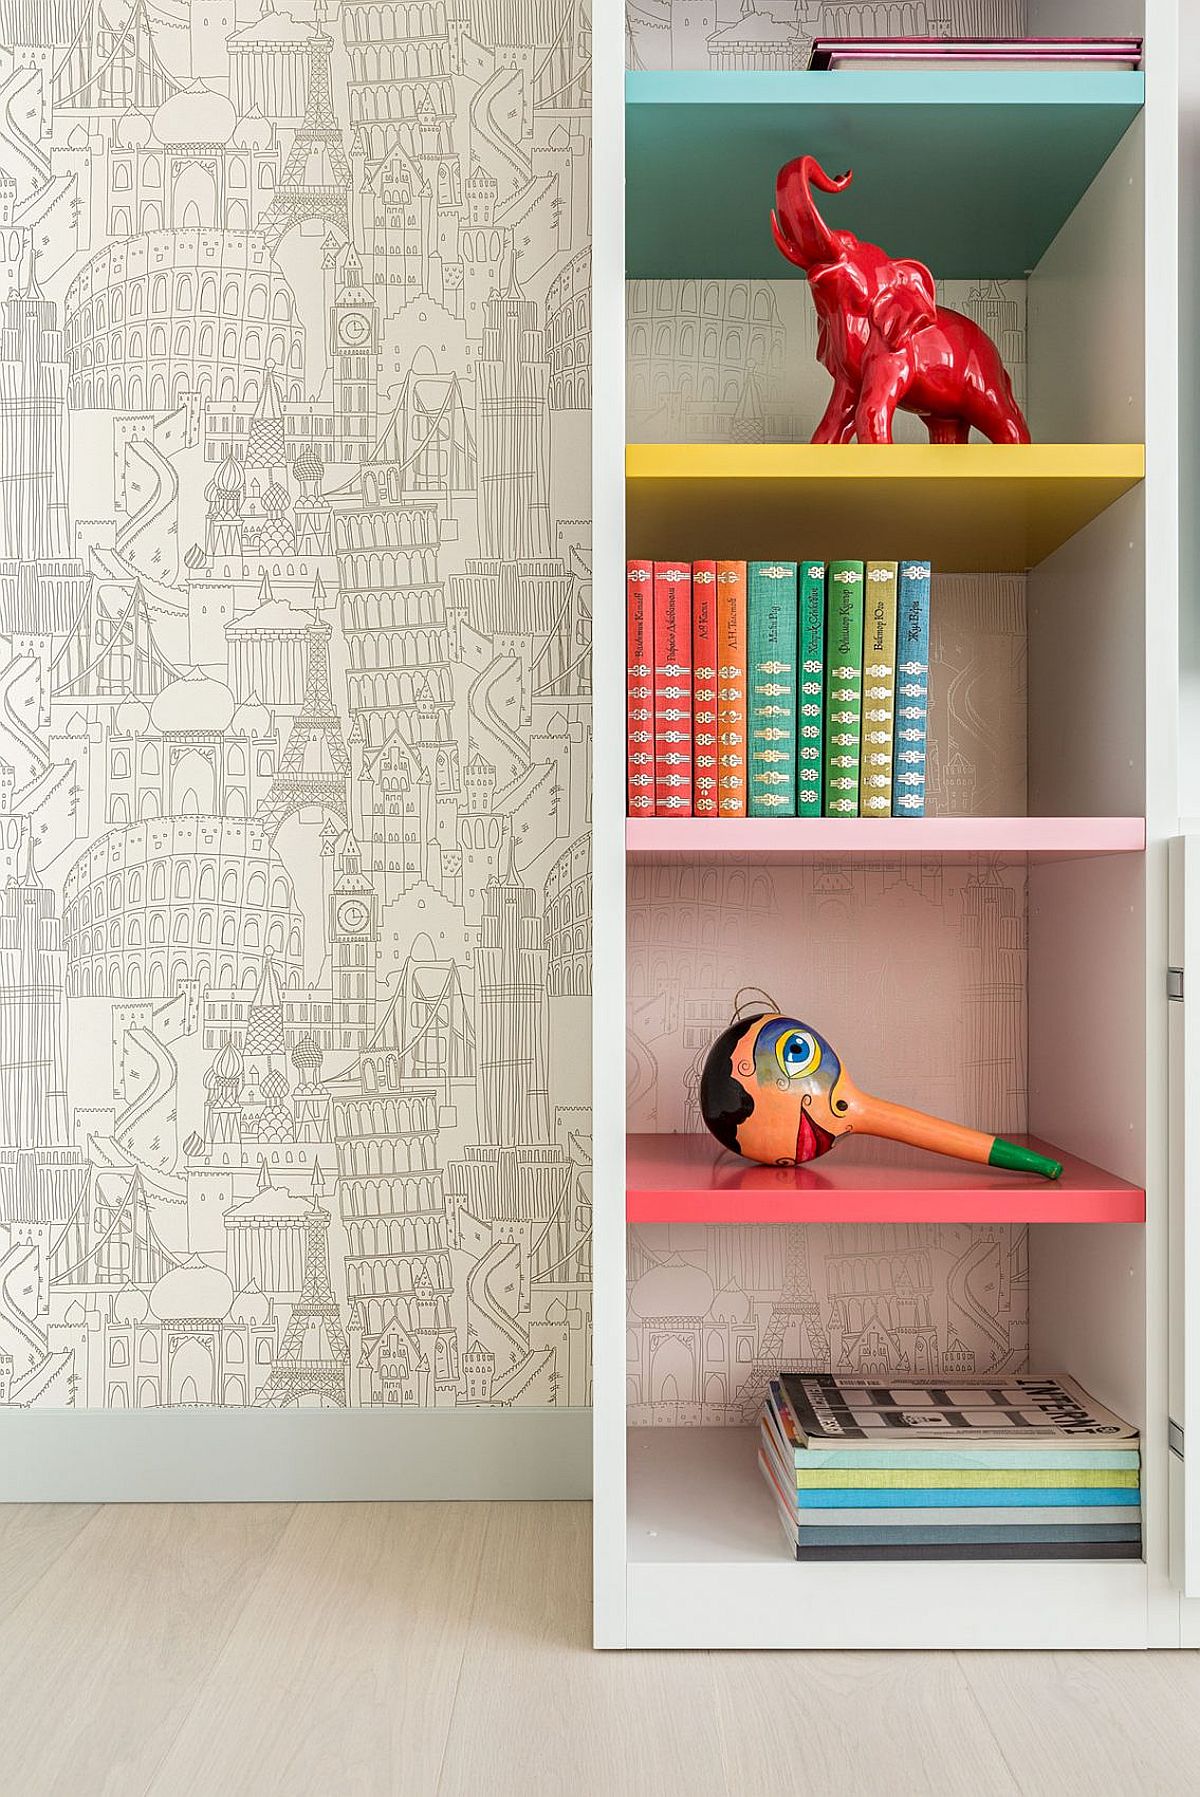 Books and accessories add color to the neutral interior